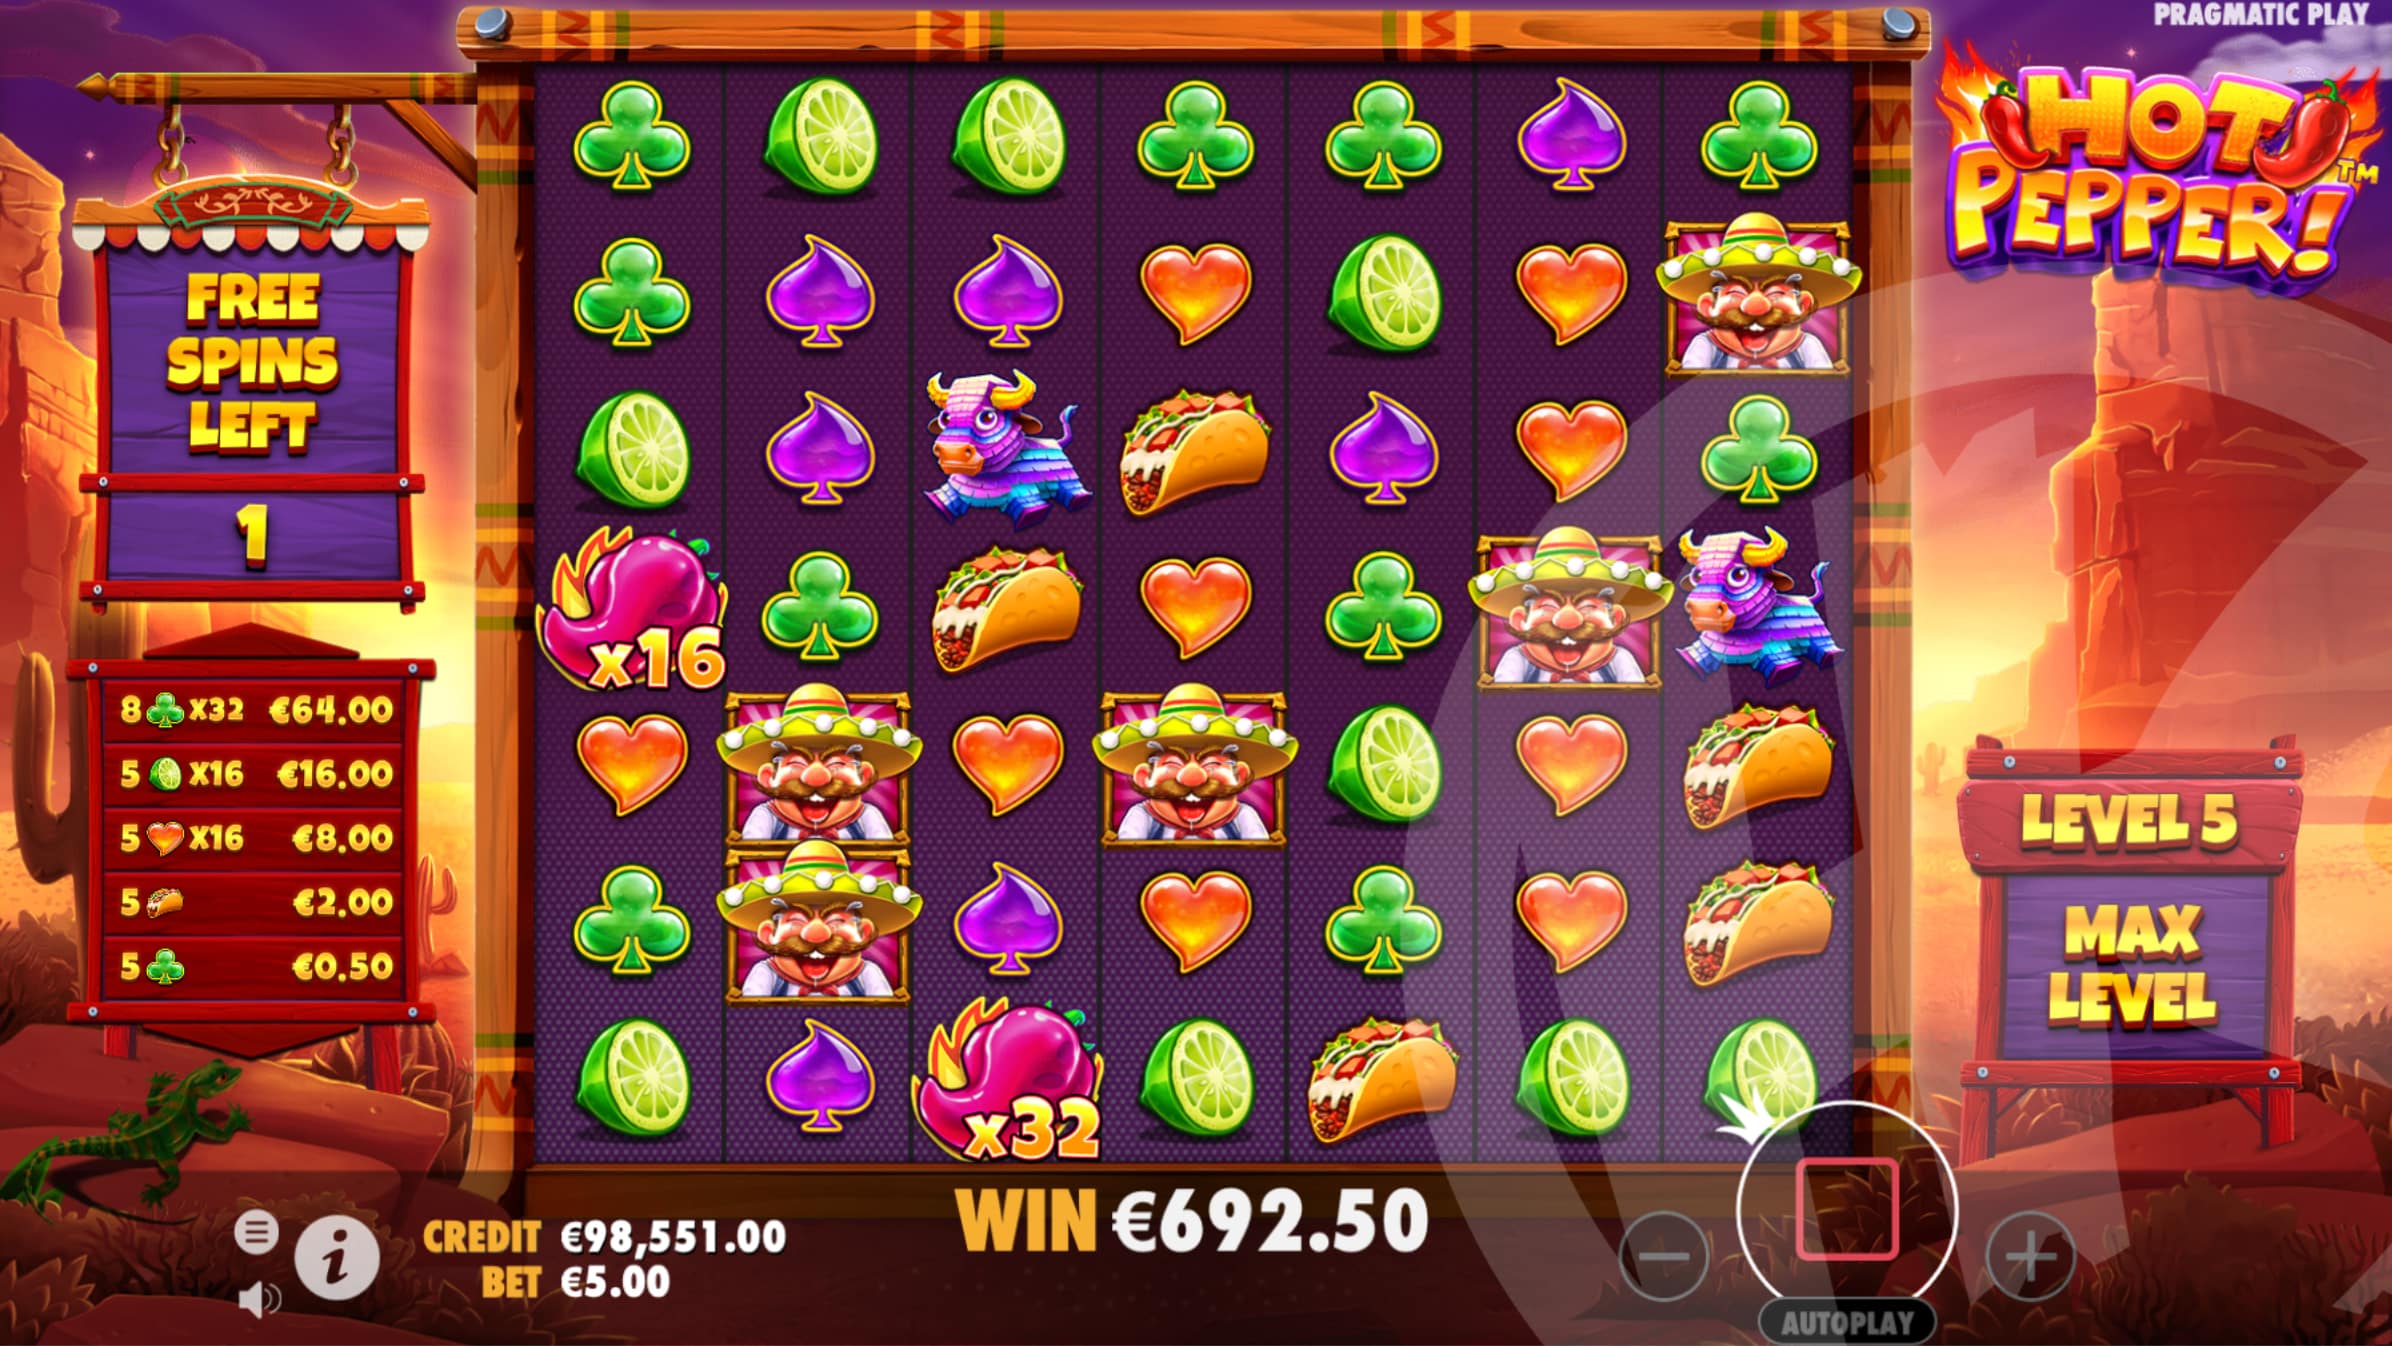 Hot Pepper Free Spins